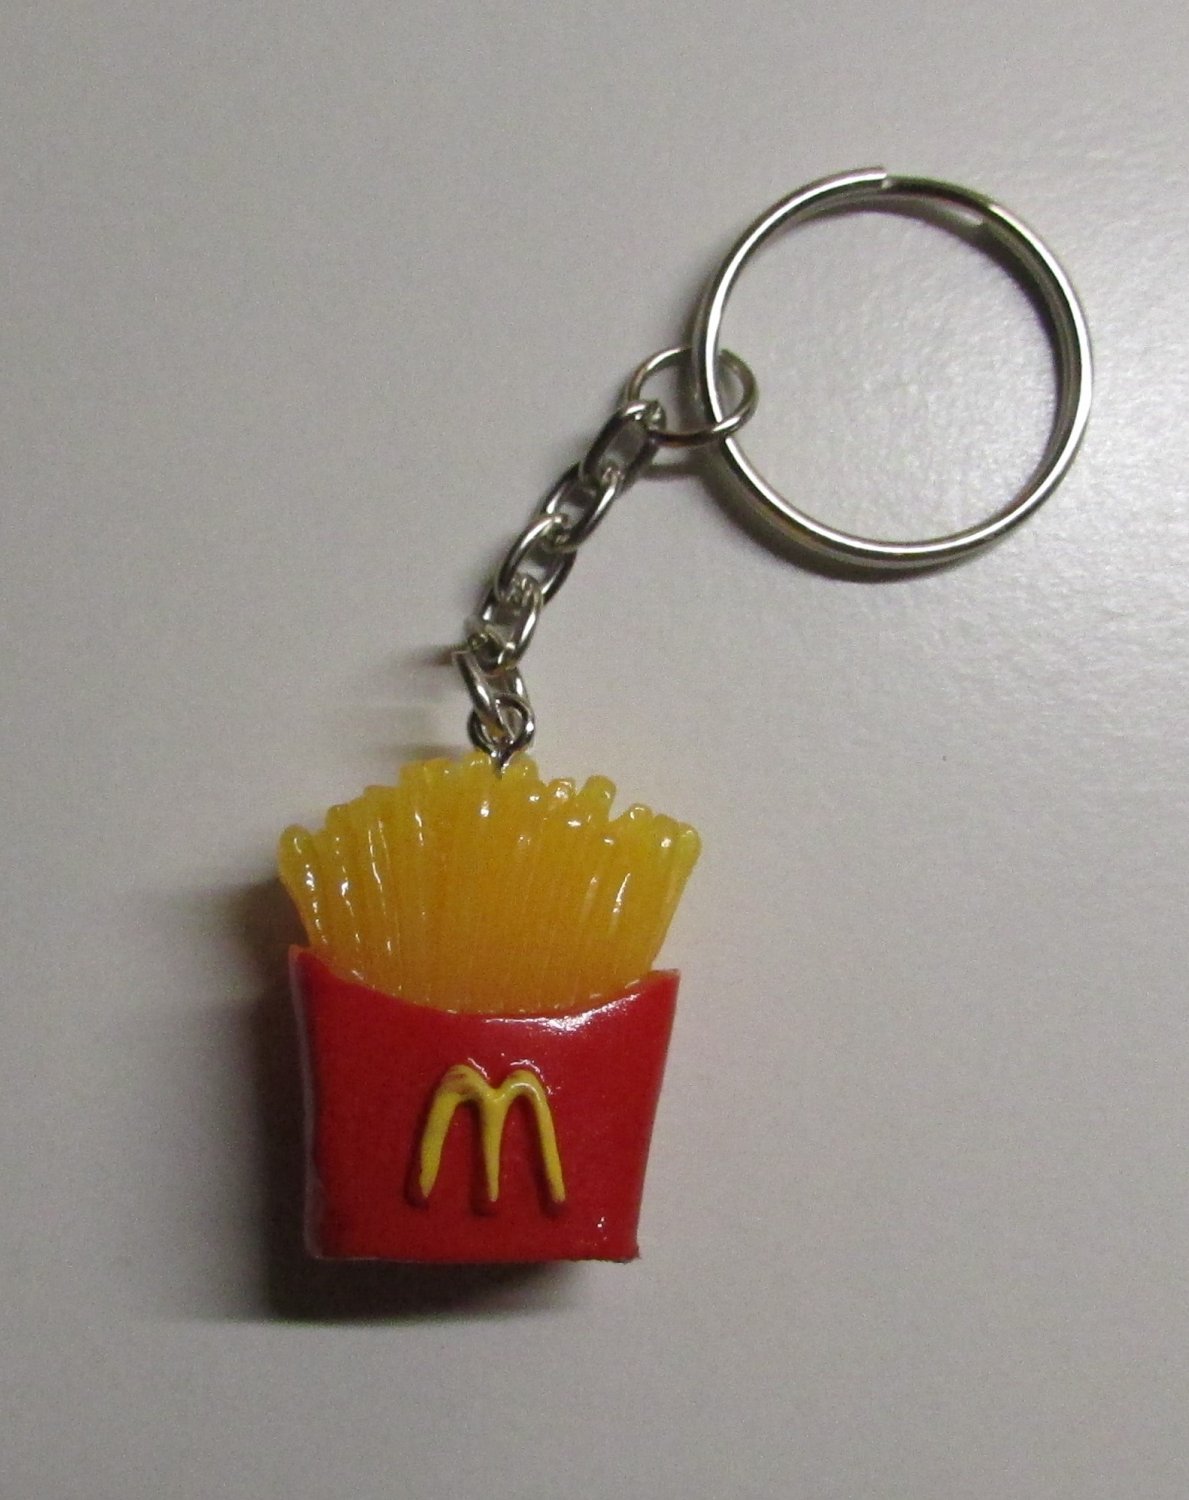 McDonalds FRENCH FRIES Golden Arches KEY CHAIN Ring Keychain NEW 